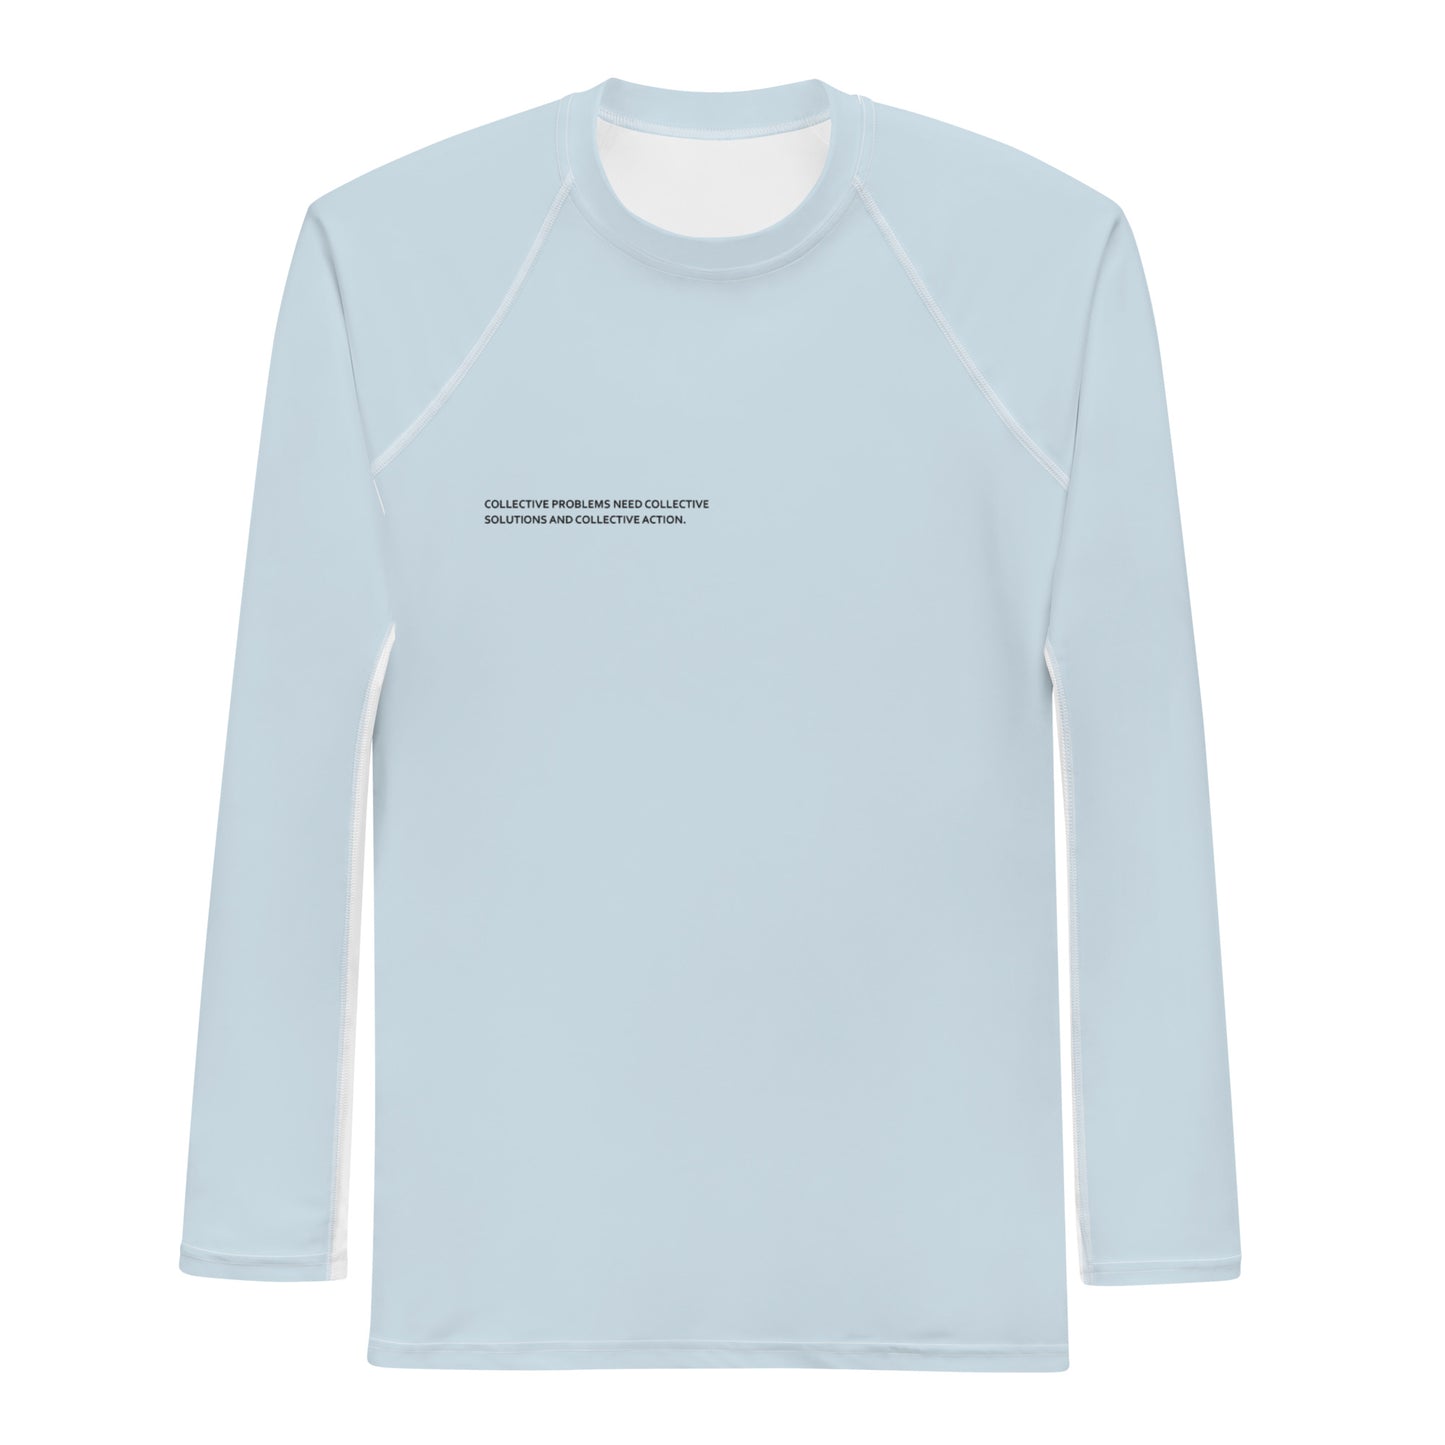 Baby Blue Climate Change Global Warming Statement - Sustainably Made Men's Long Sleeve Tee